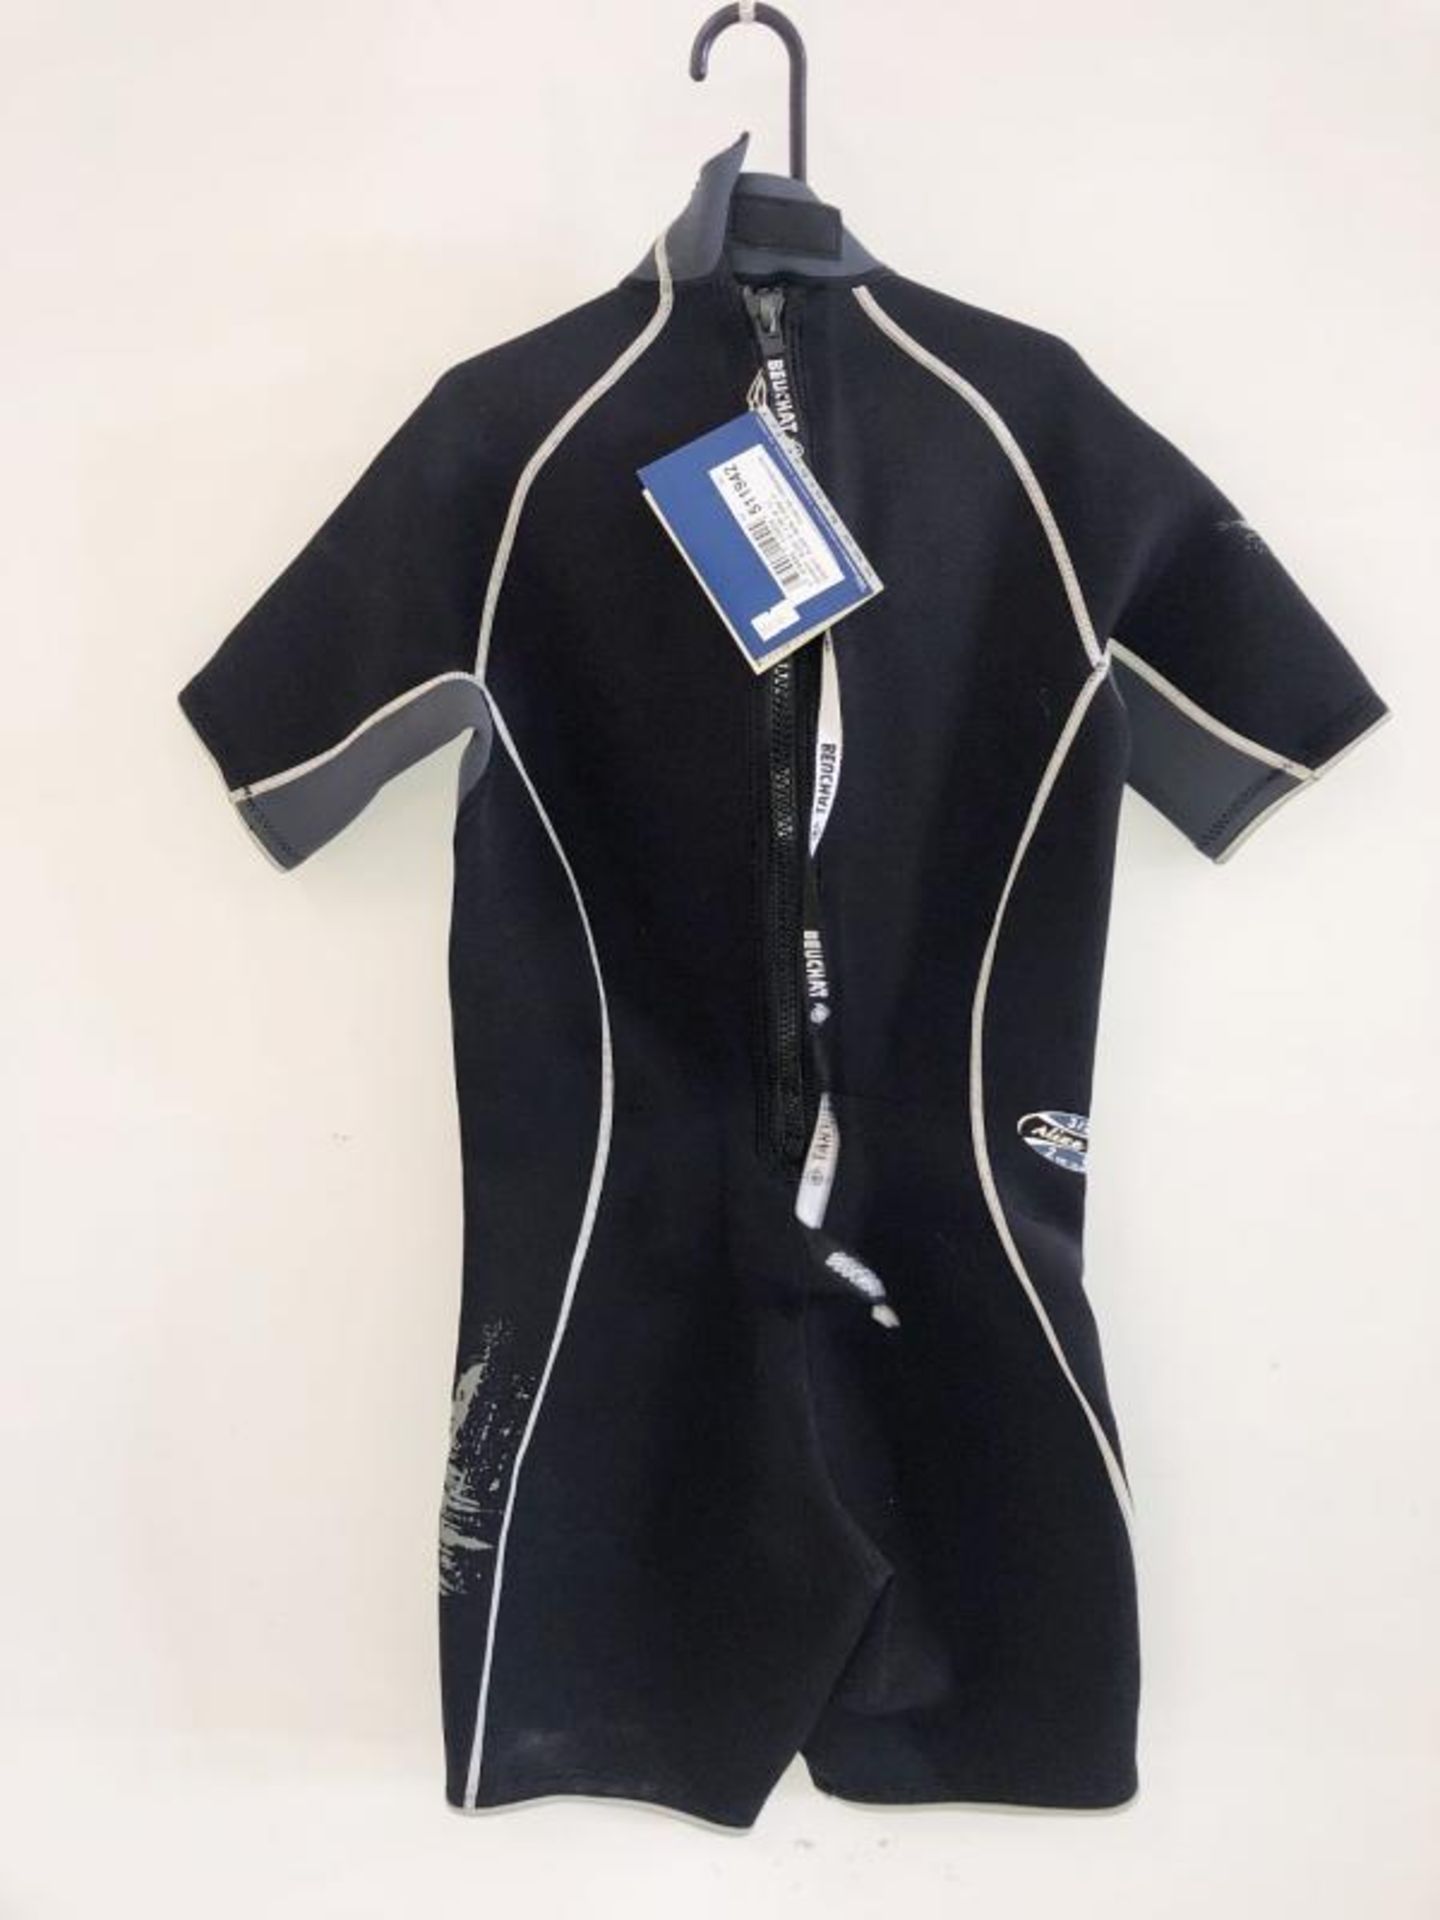 1 x New Beuchat Shorty Wetsuit Size Small - Ref: NS470 - CL349 - Location: Altrincham WA14 - Image 4 of 5